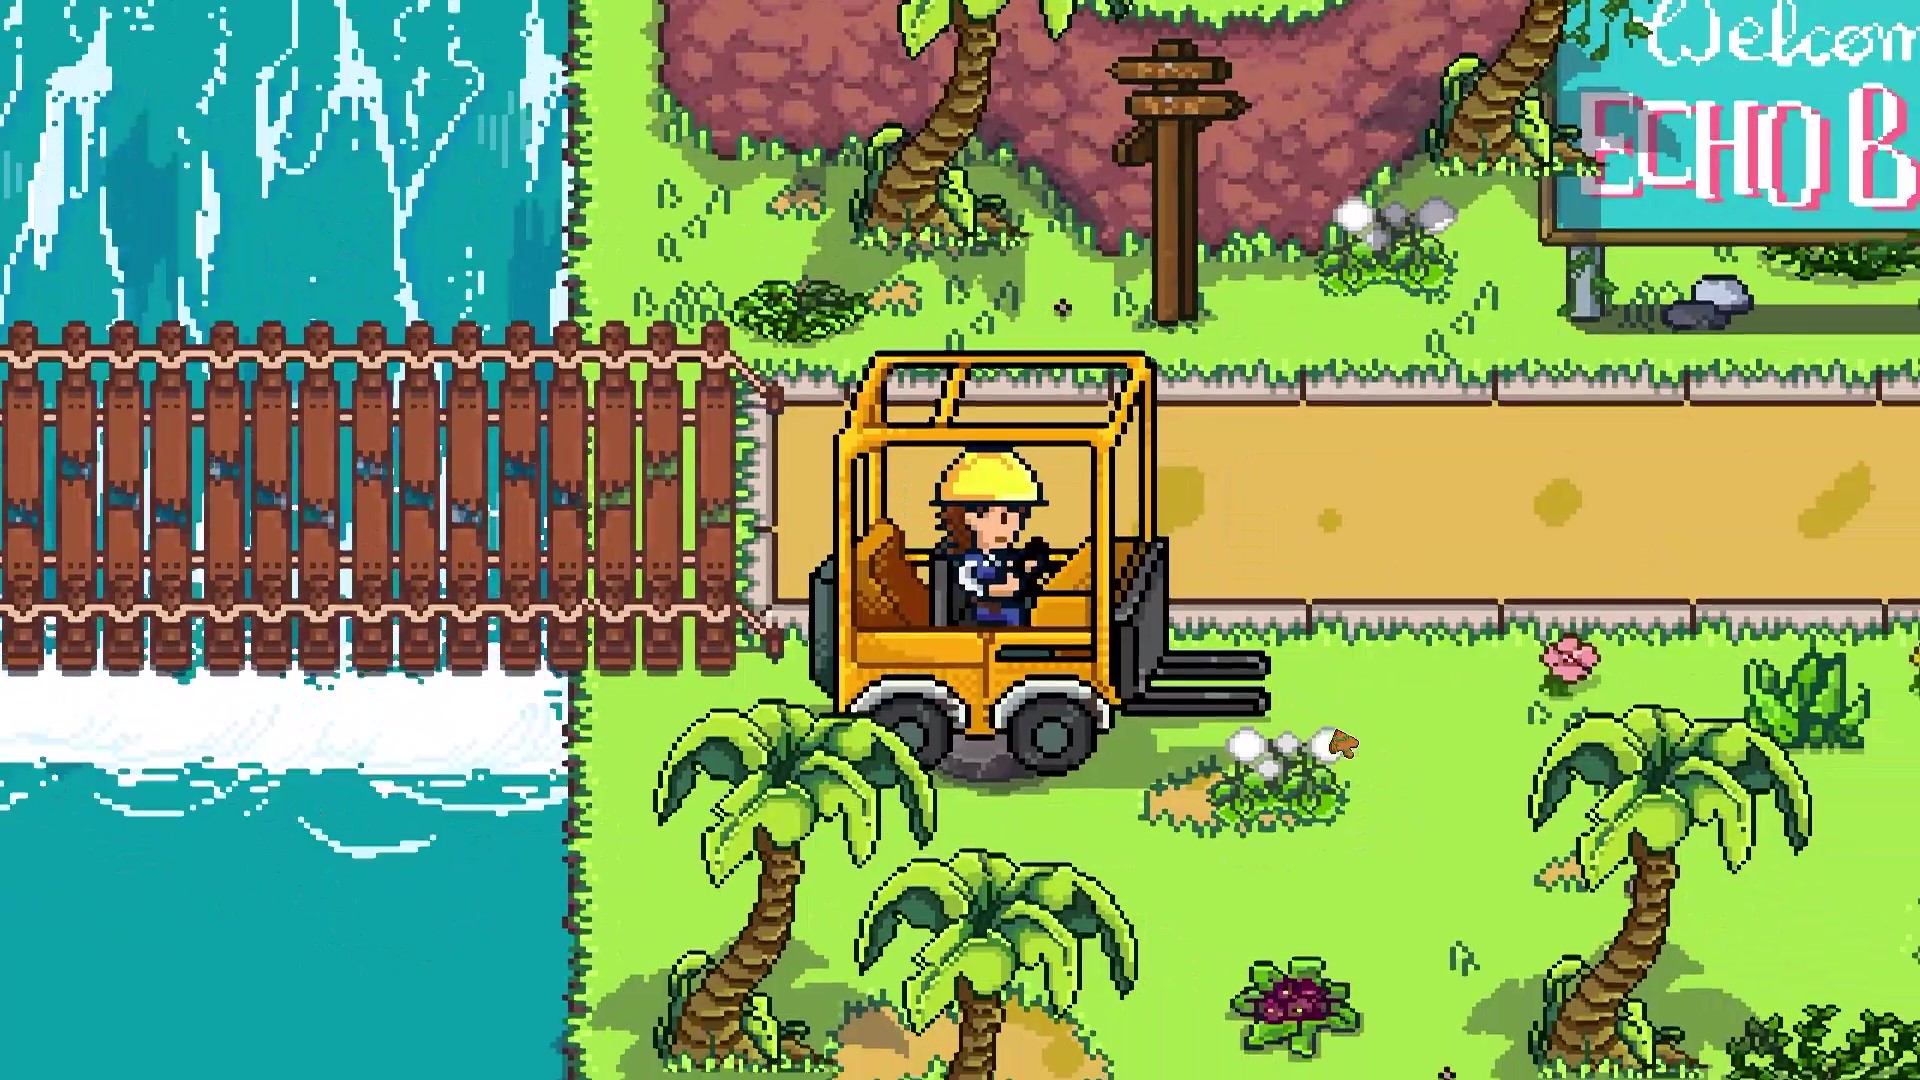 Main character driving a forklift